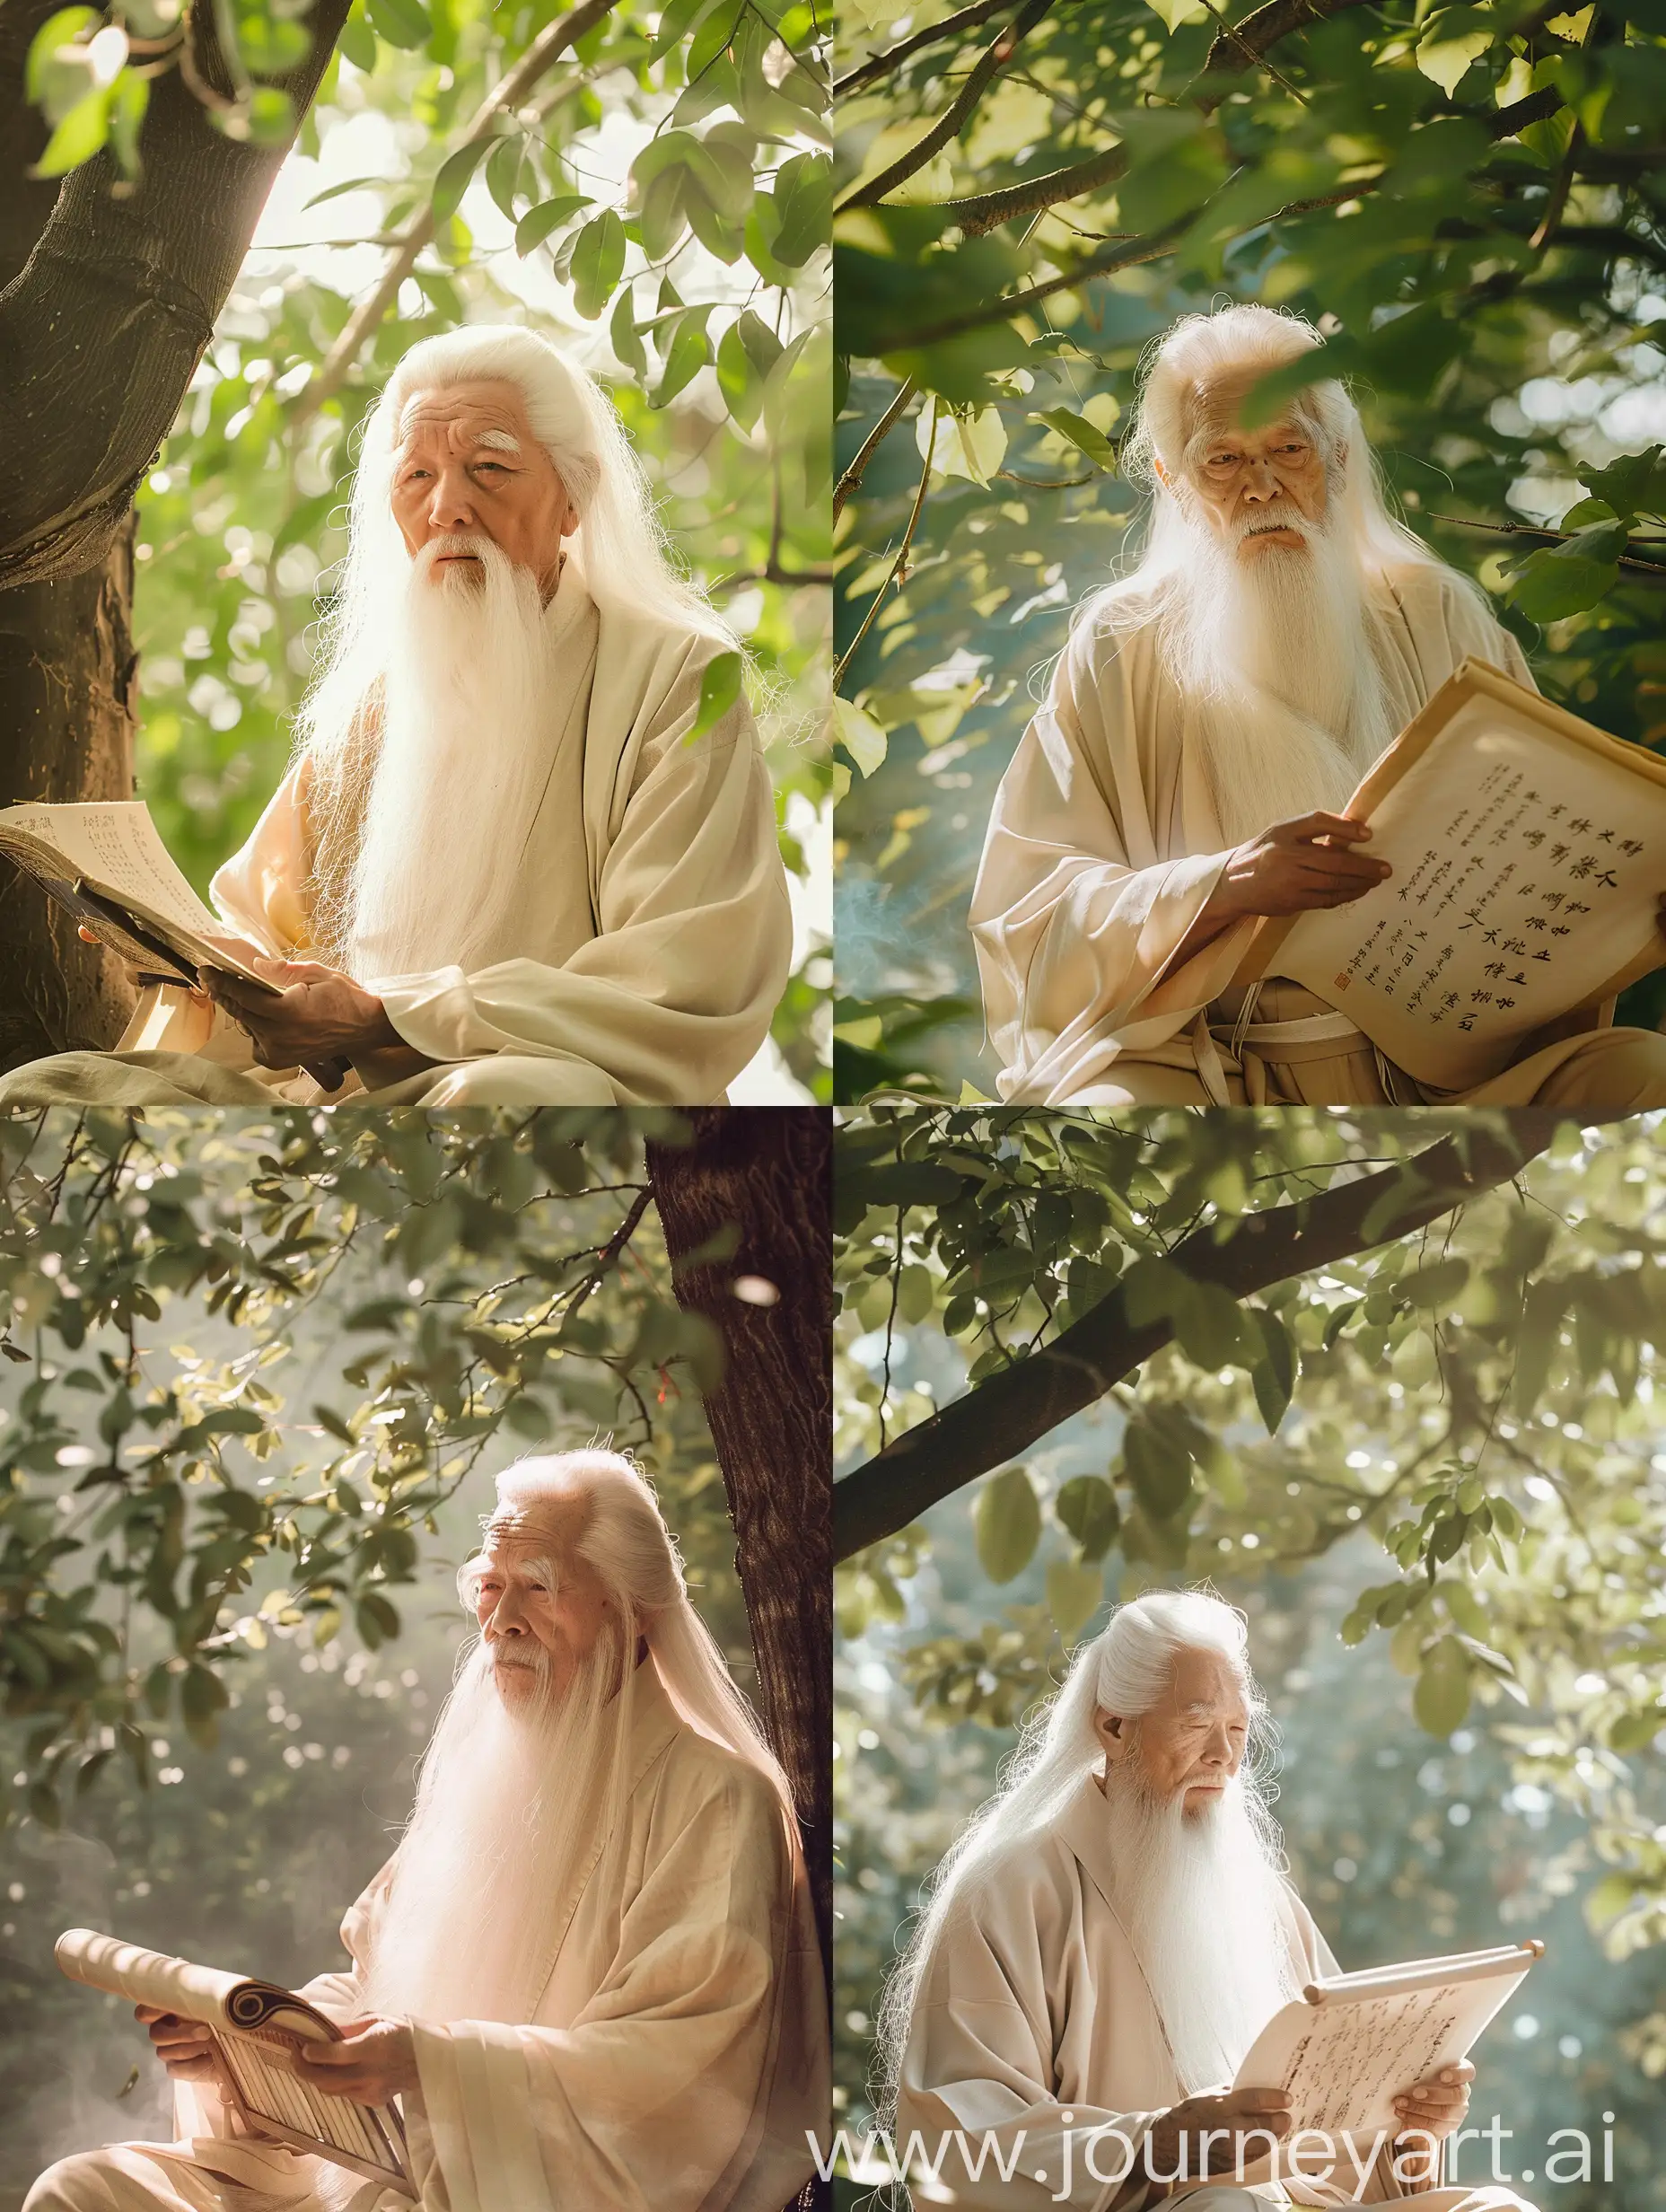 Elderly-Chinese-Scholar-Reading-Scroll-Under-Tree-in-Tranquil-Atmosphere